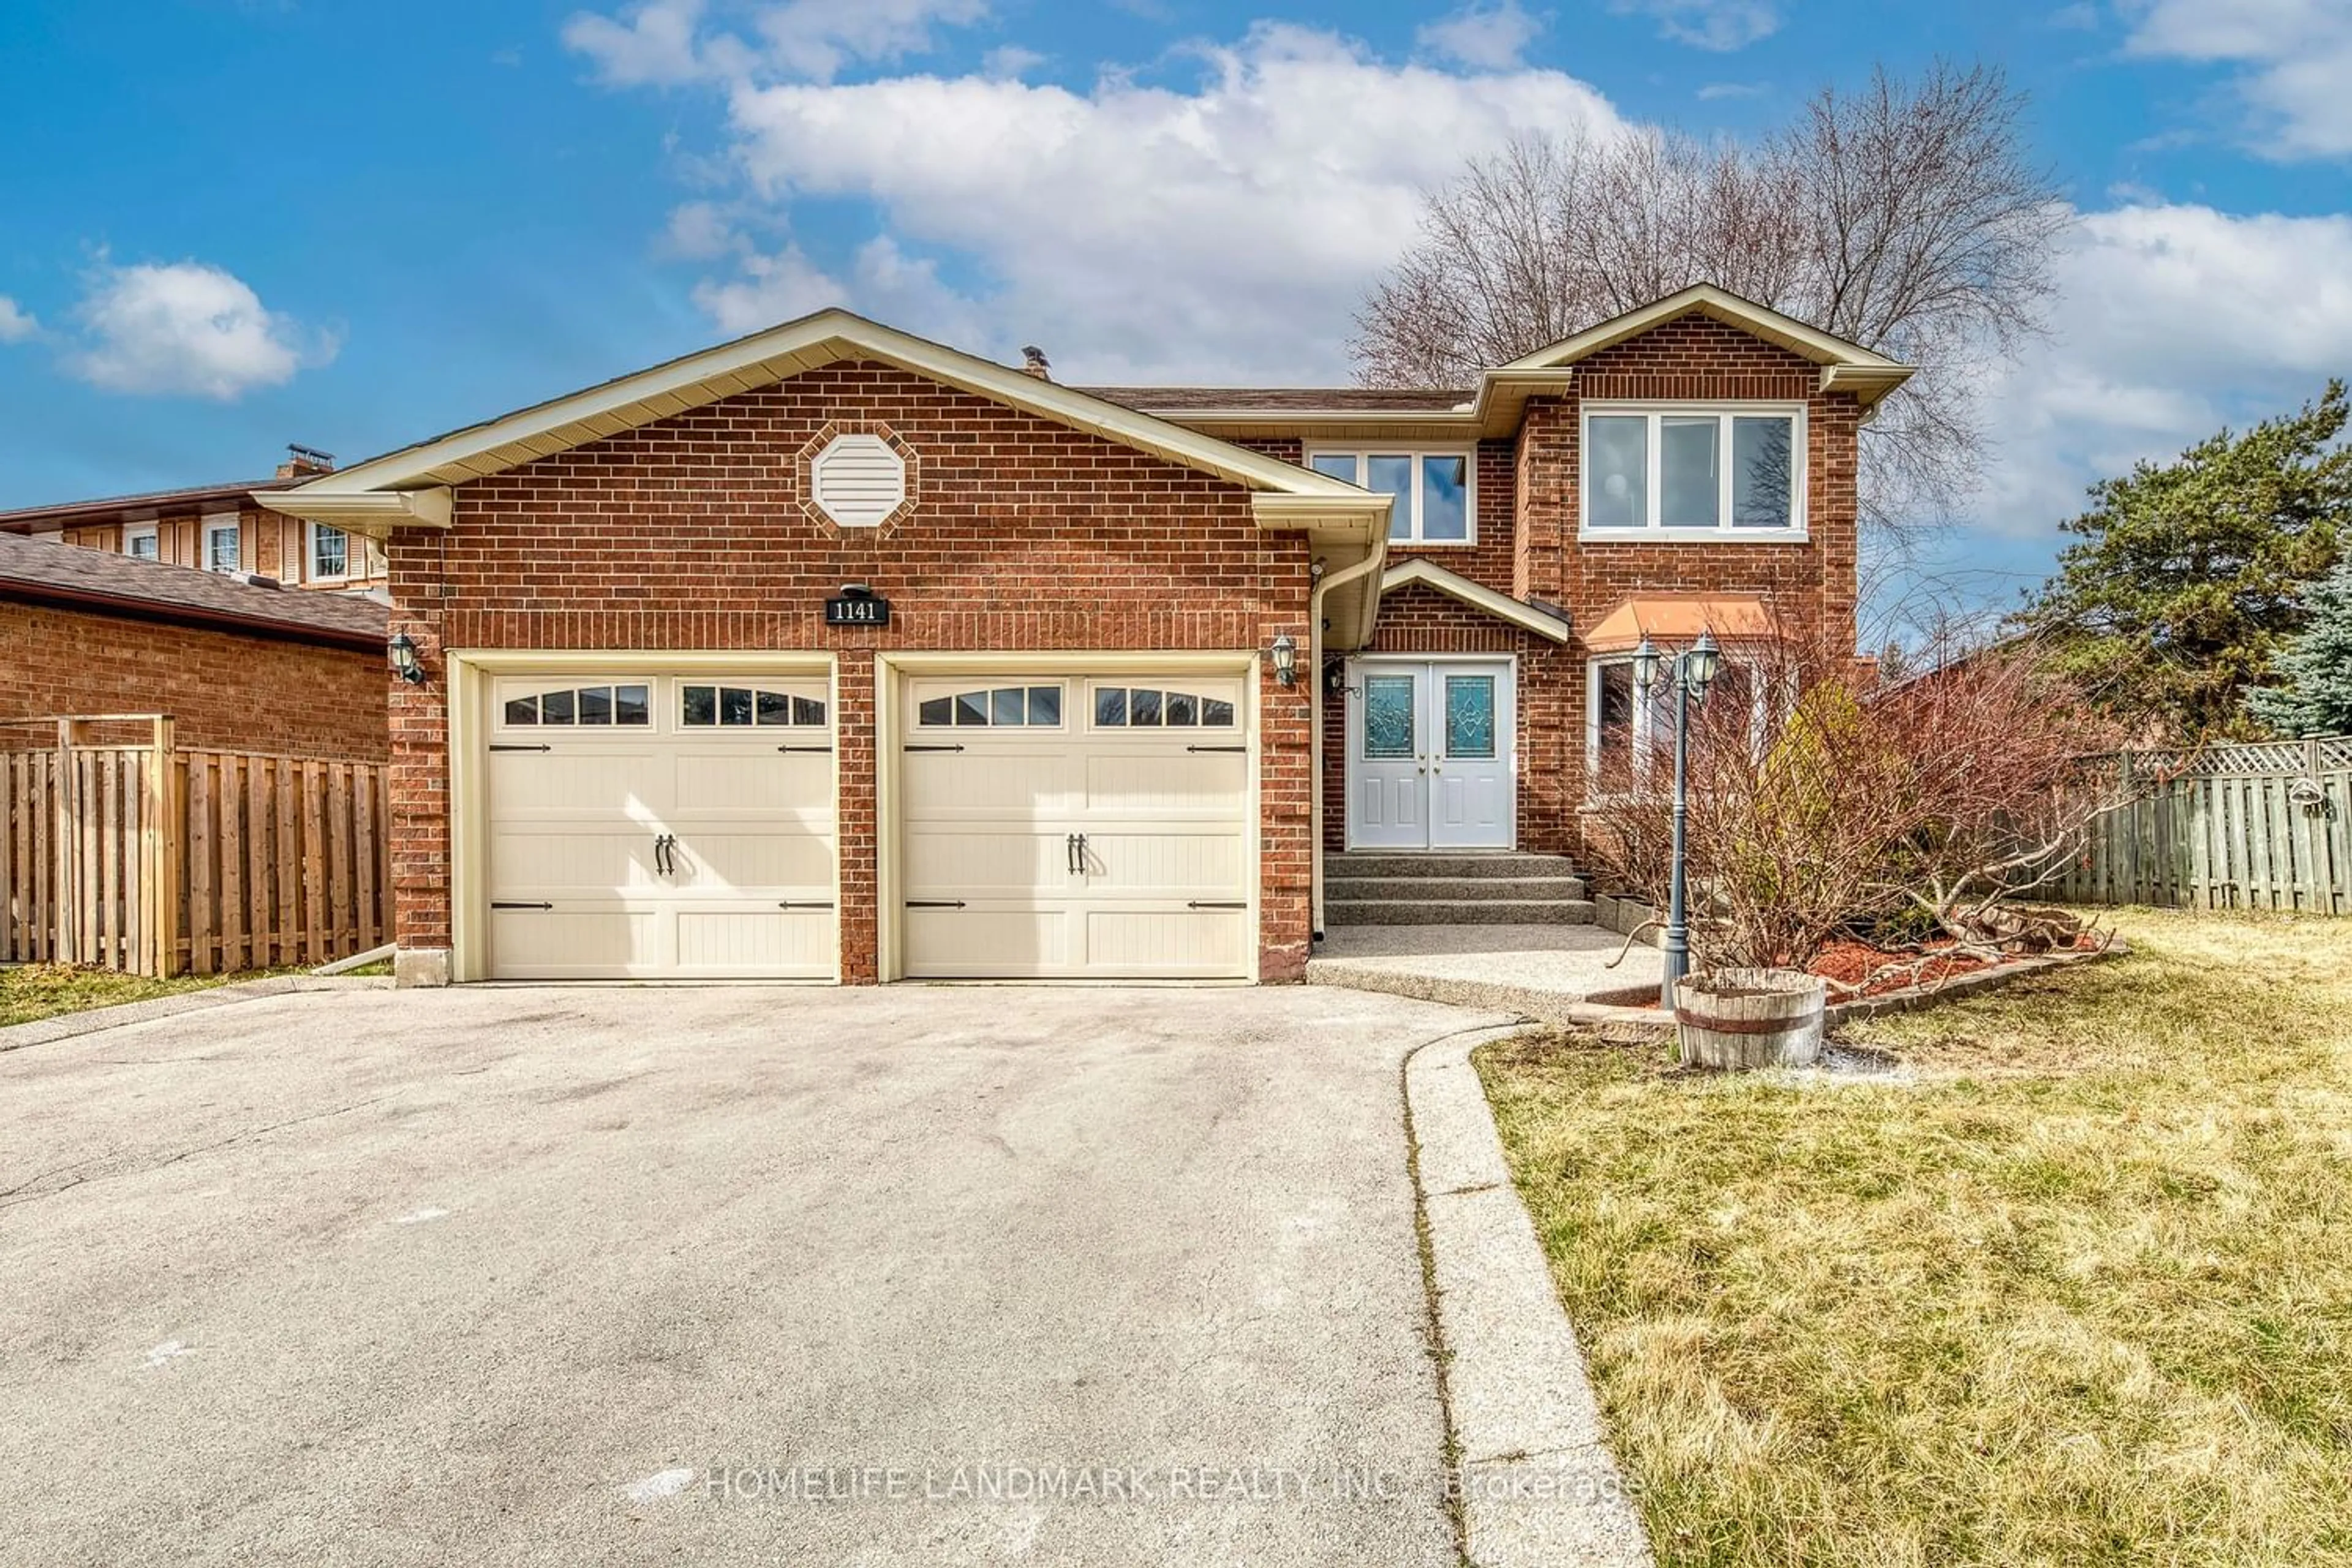 Home with brick exterior material for 1141 Pilgrims Way, Oakville Ontario L6M 1H3